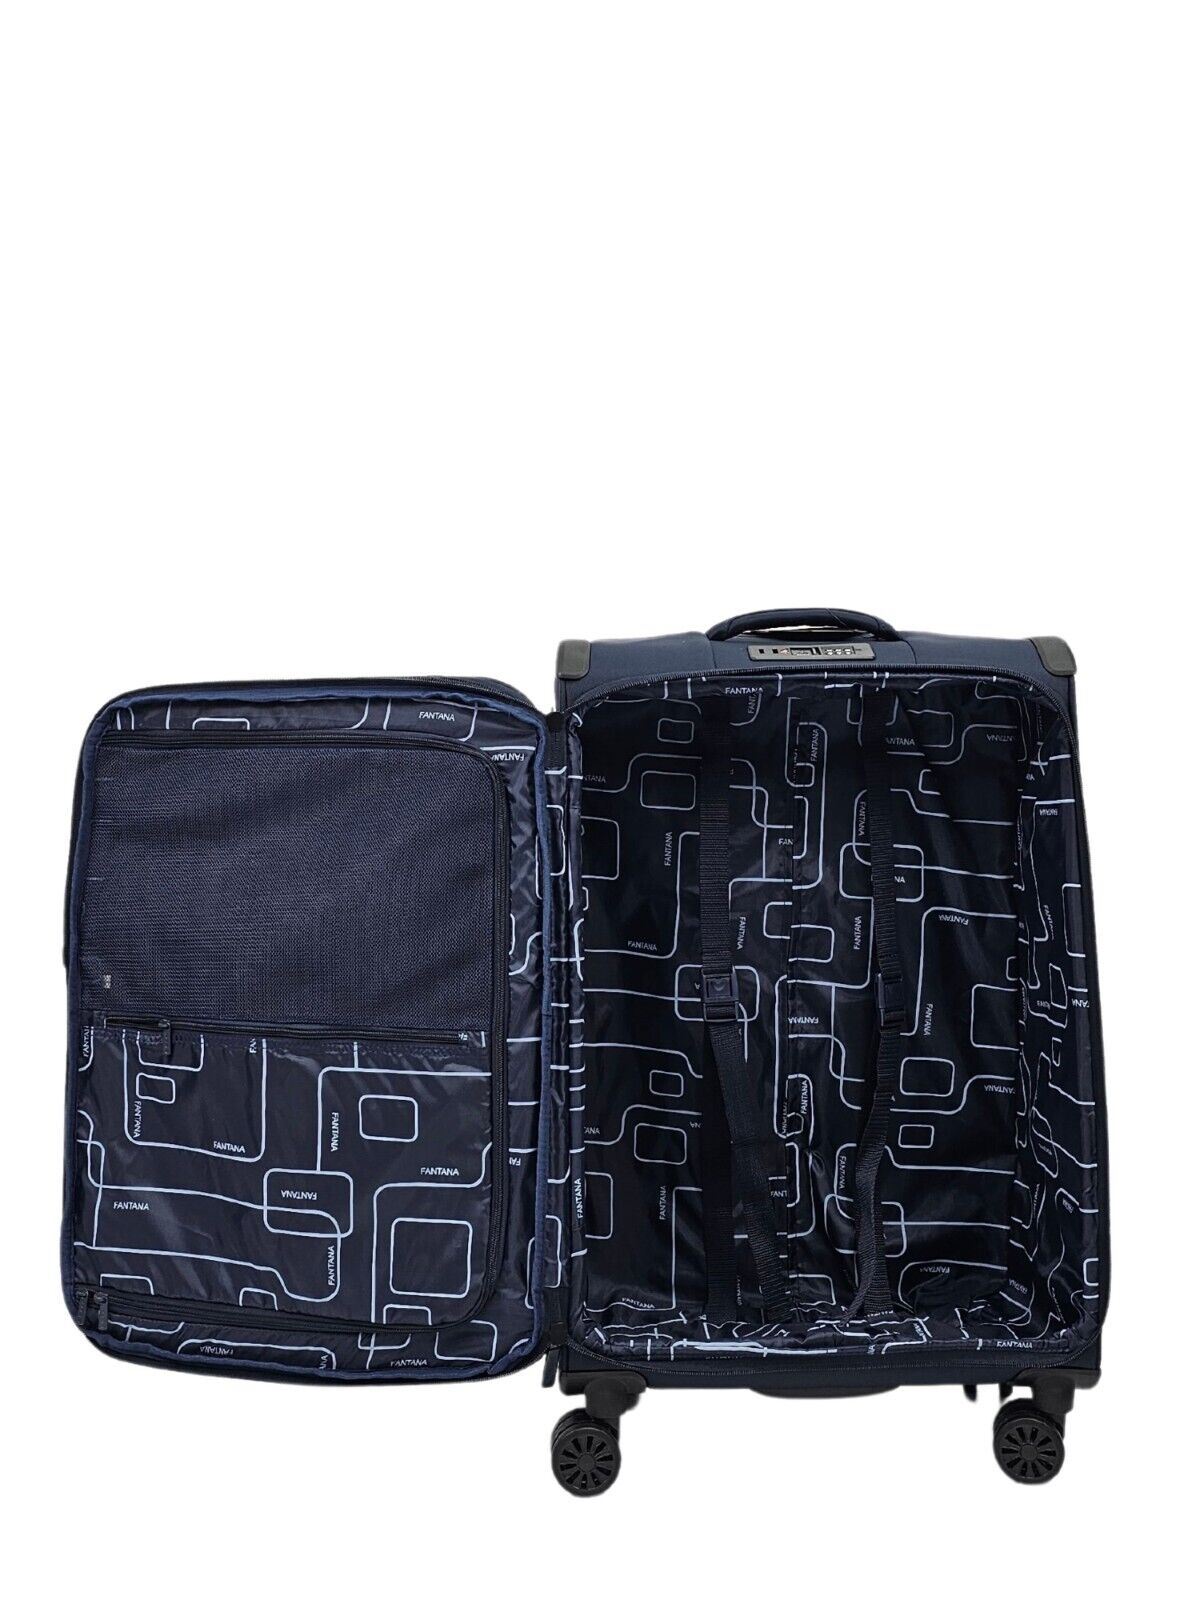 Lightweight Navy Blue Suitcases 4 Wheel Luggage Travel Cabin Bag - Upperclass Fashions 